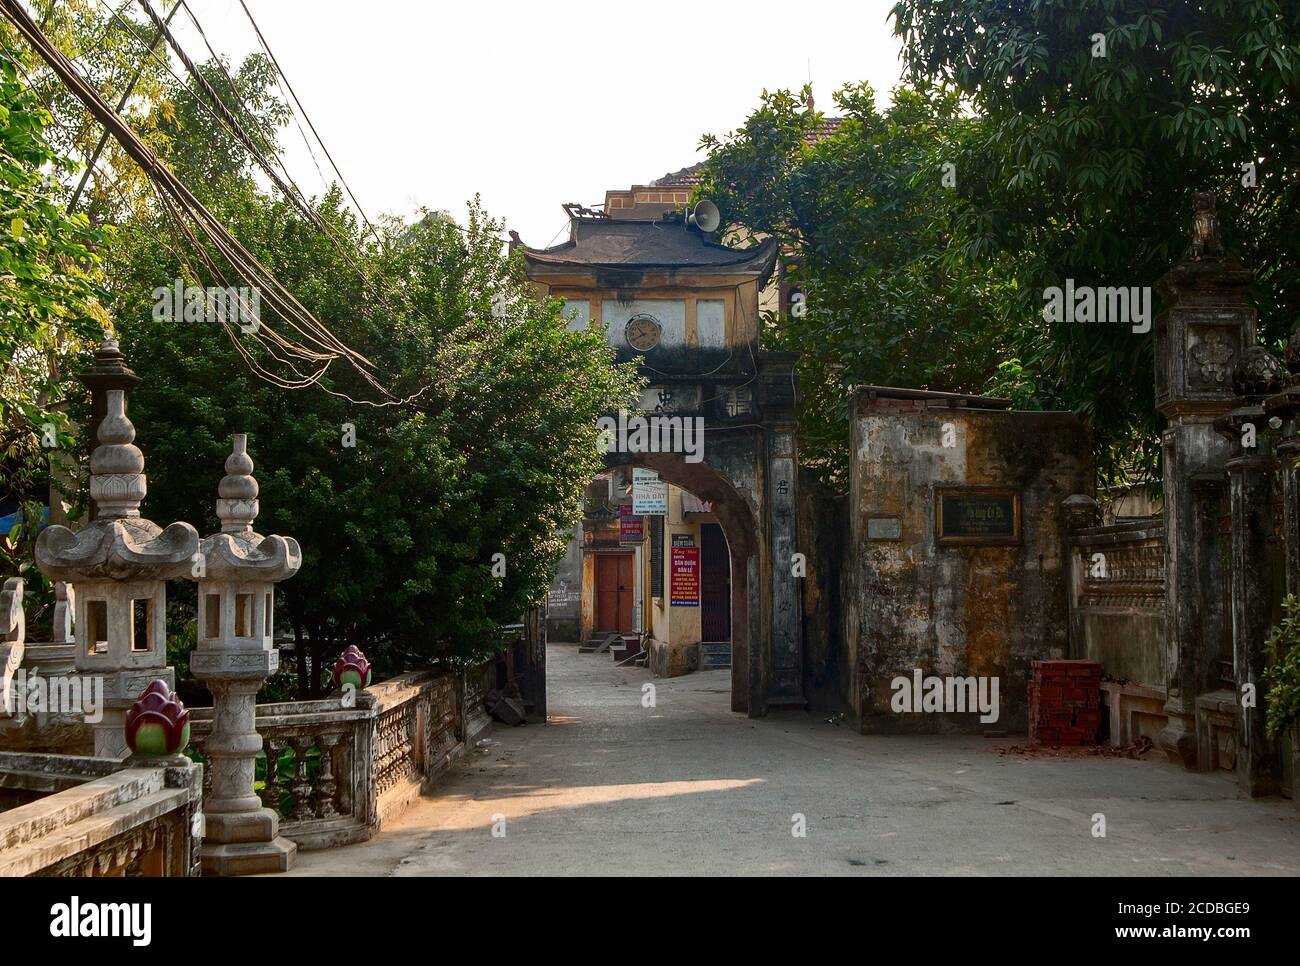 historical and cultural area, Quoc Tu Giam, downtown Ha Noi, Vietnam Stock Photo